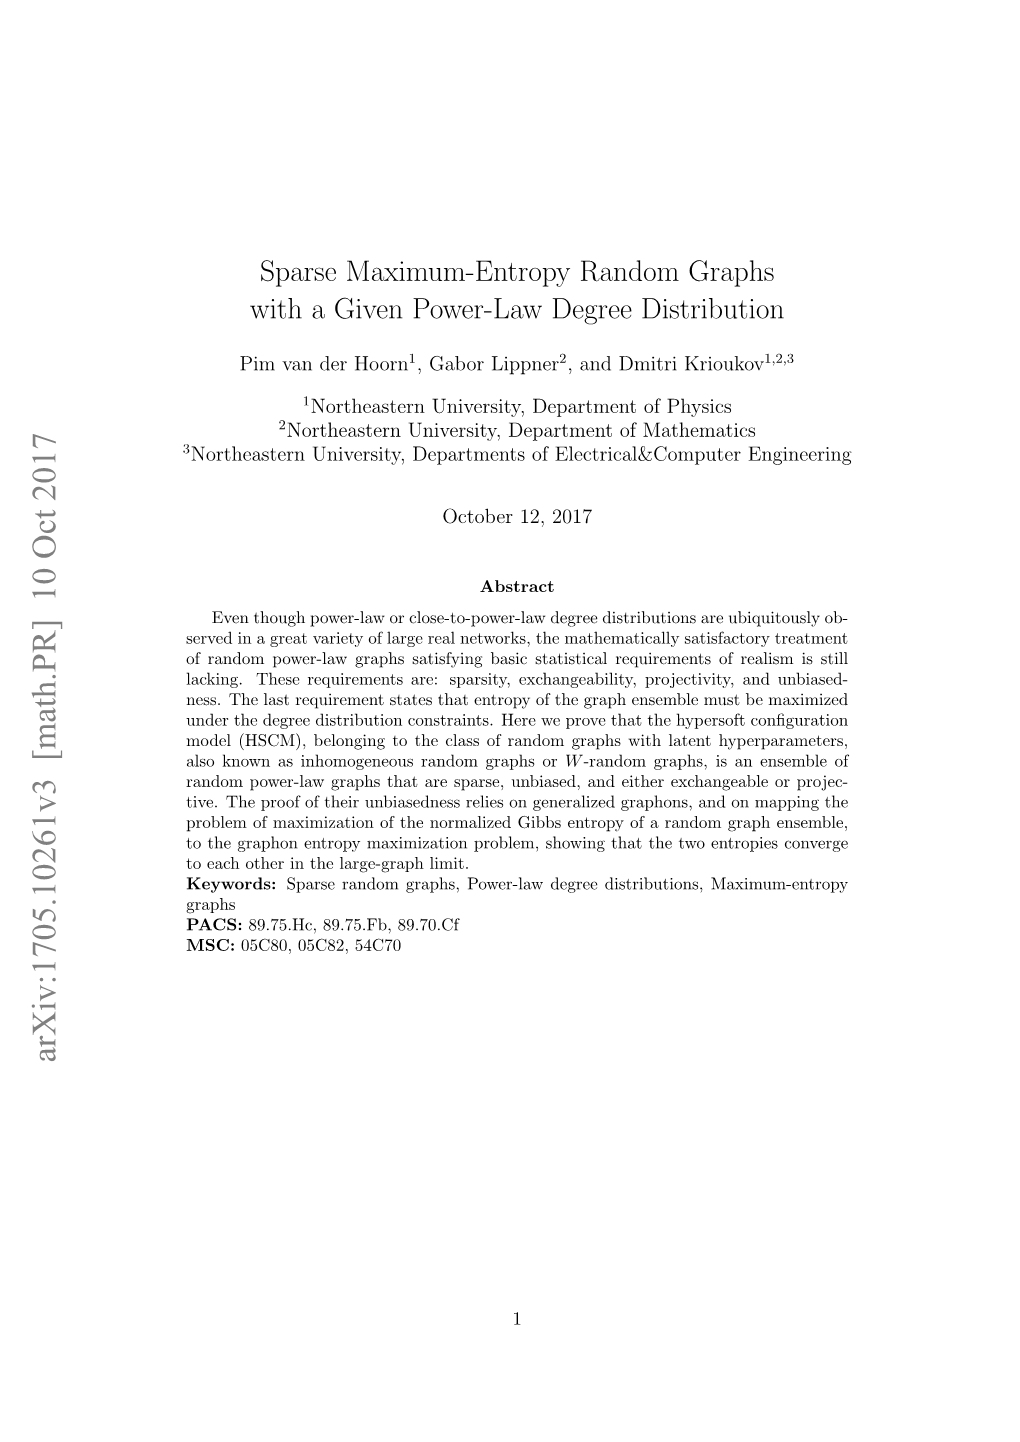 Sparse Maximum-Entropy Random Graphs with a Given Power-Law Degree Distribution